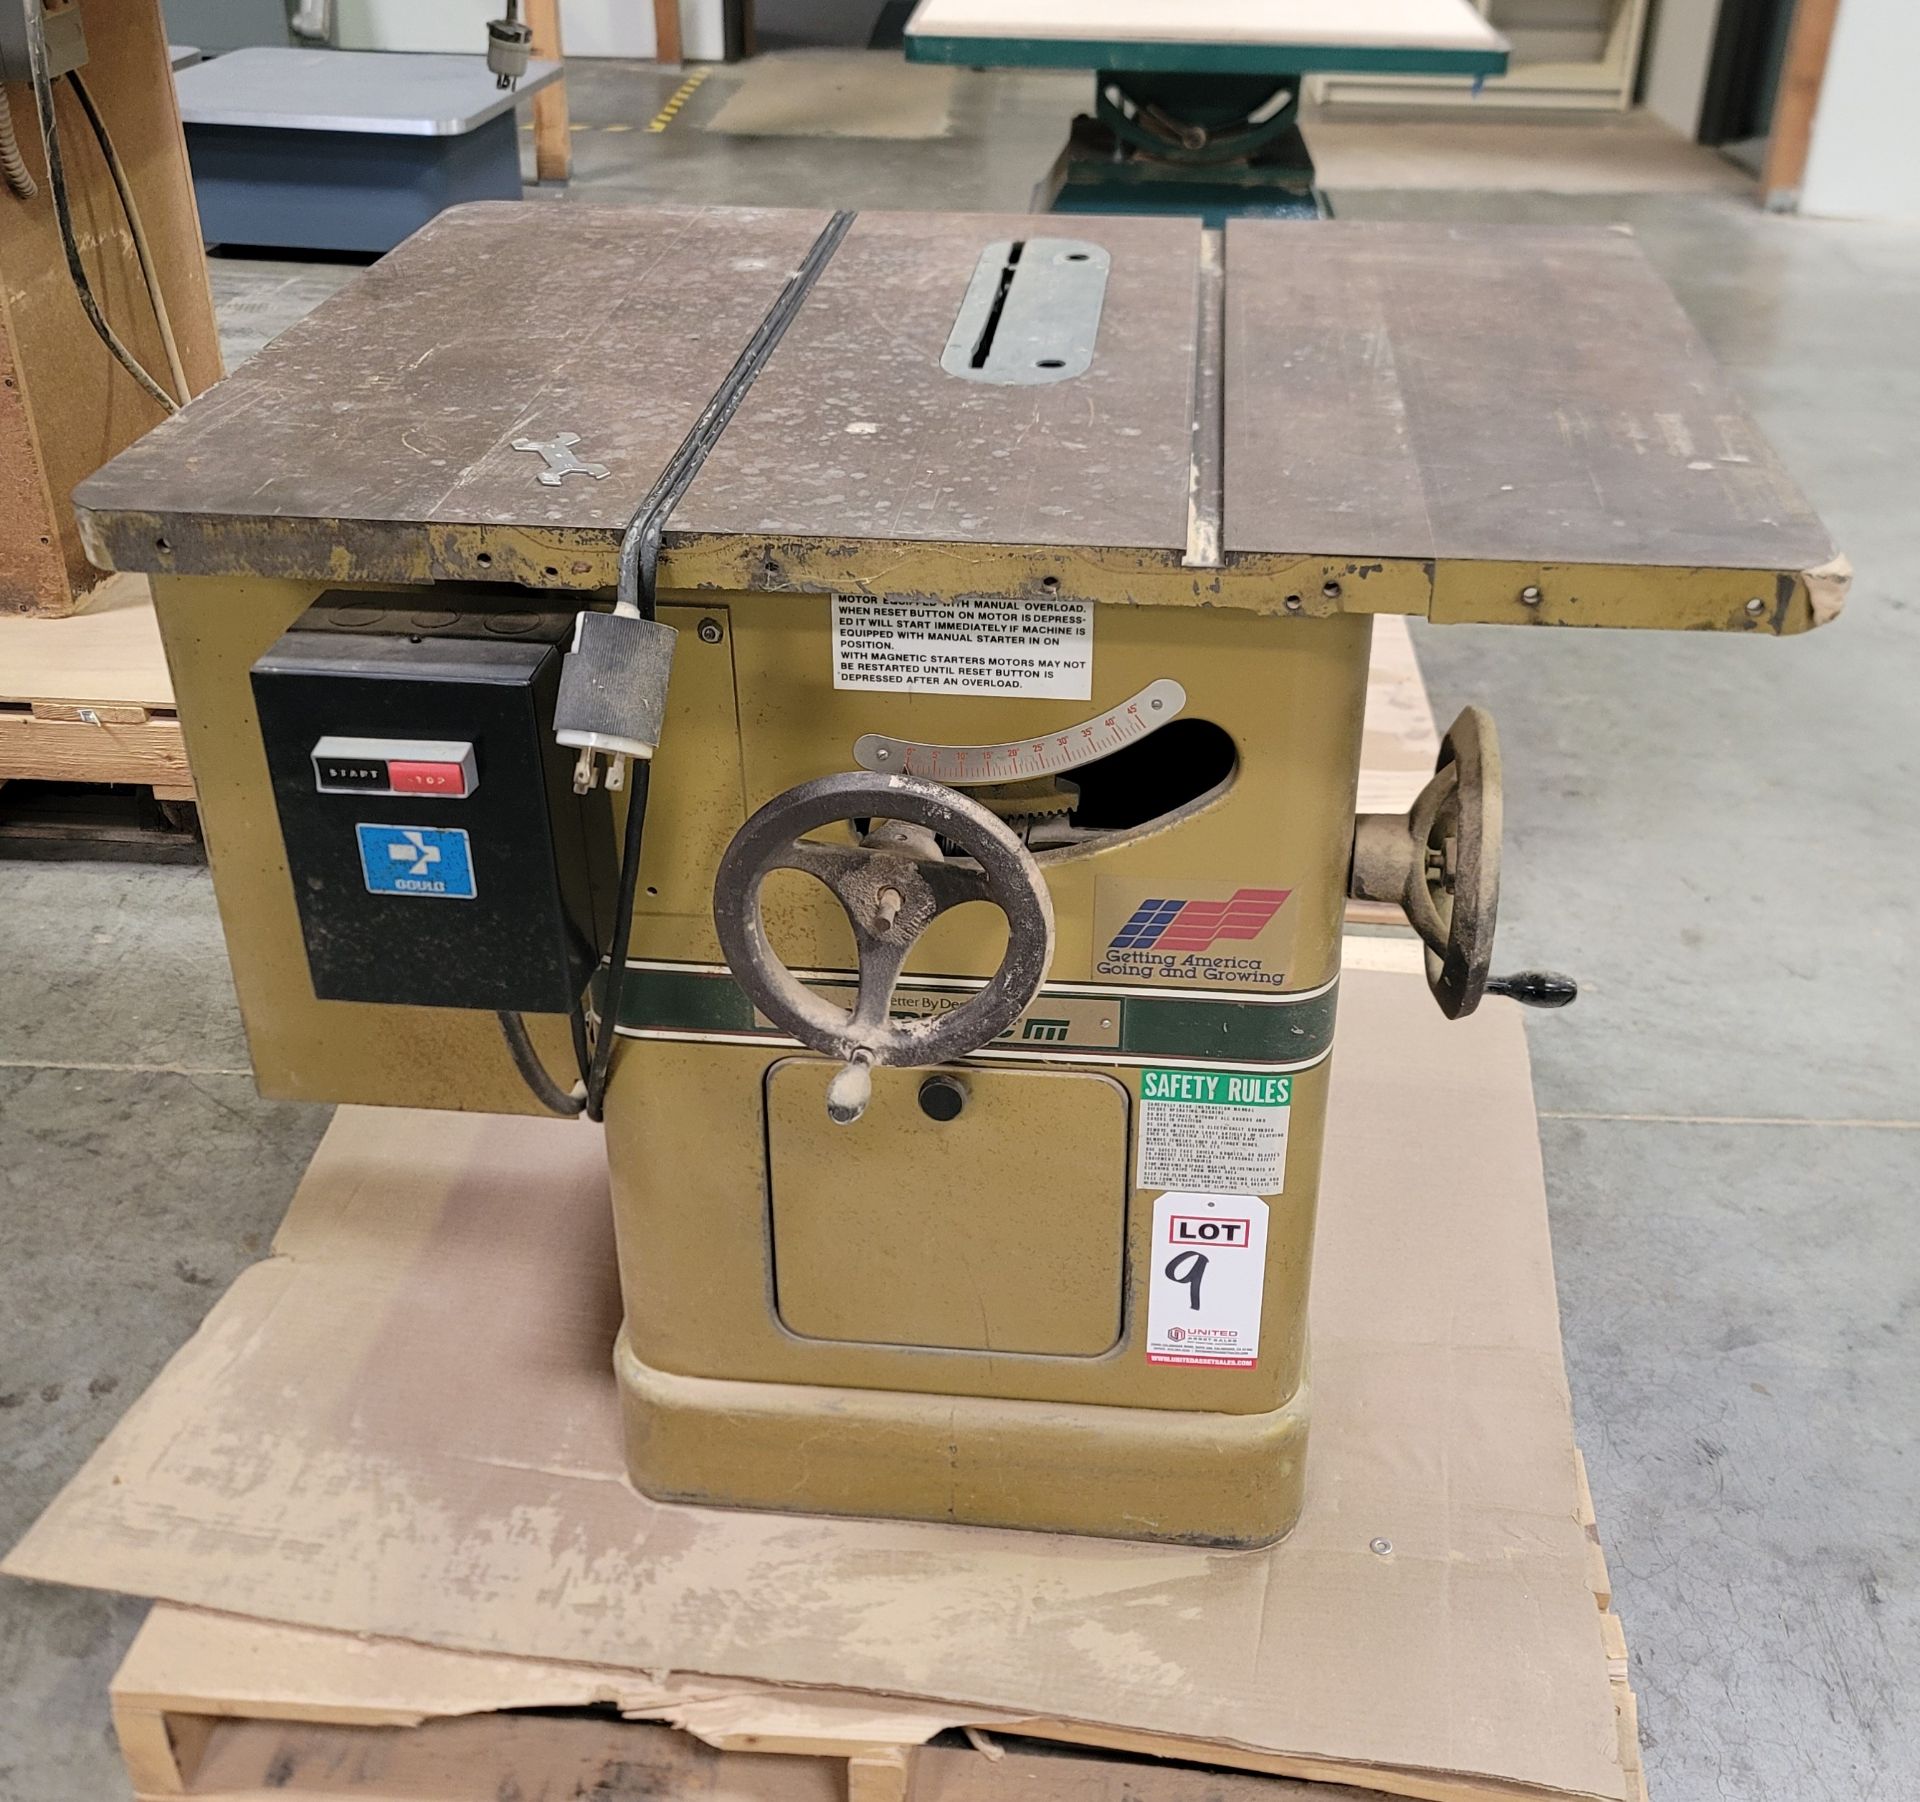 POWERMATIC 10" TABLE SAW, MODEL 66, 2 HP, 230V, 3-PHASE, S/N 84661647, 38" X 28" CAST TABLE